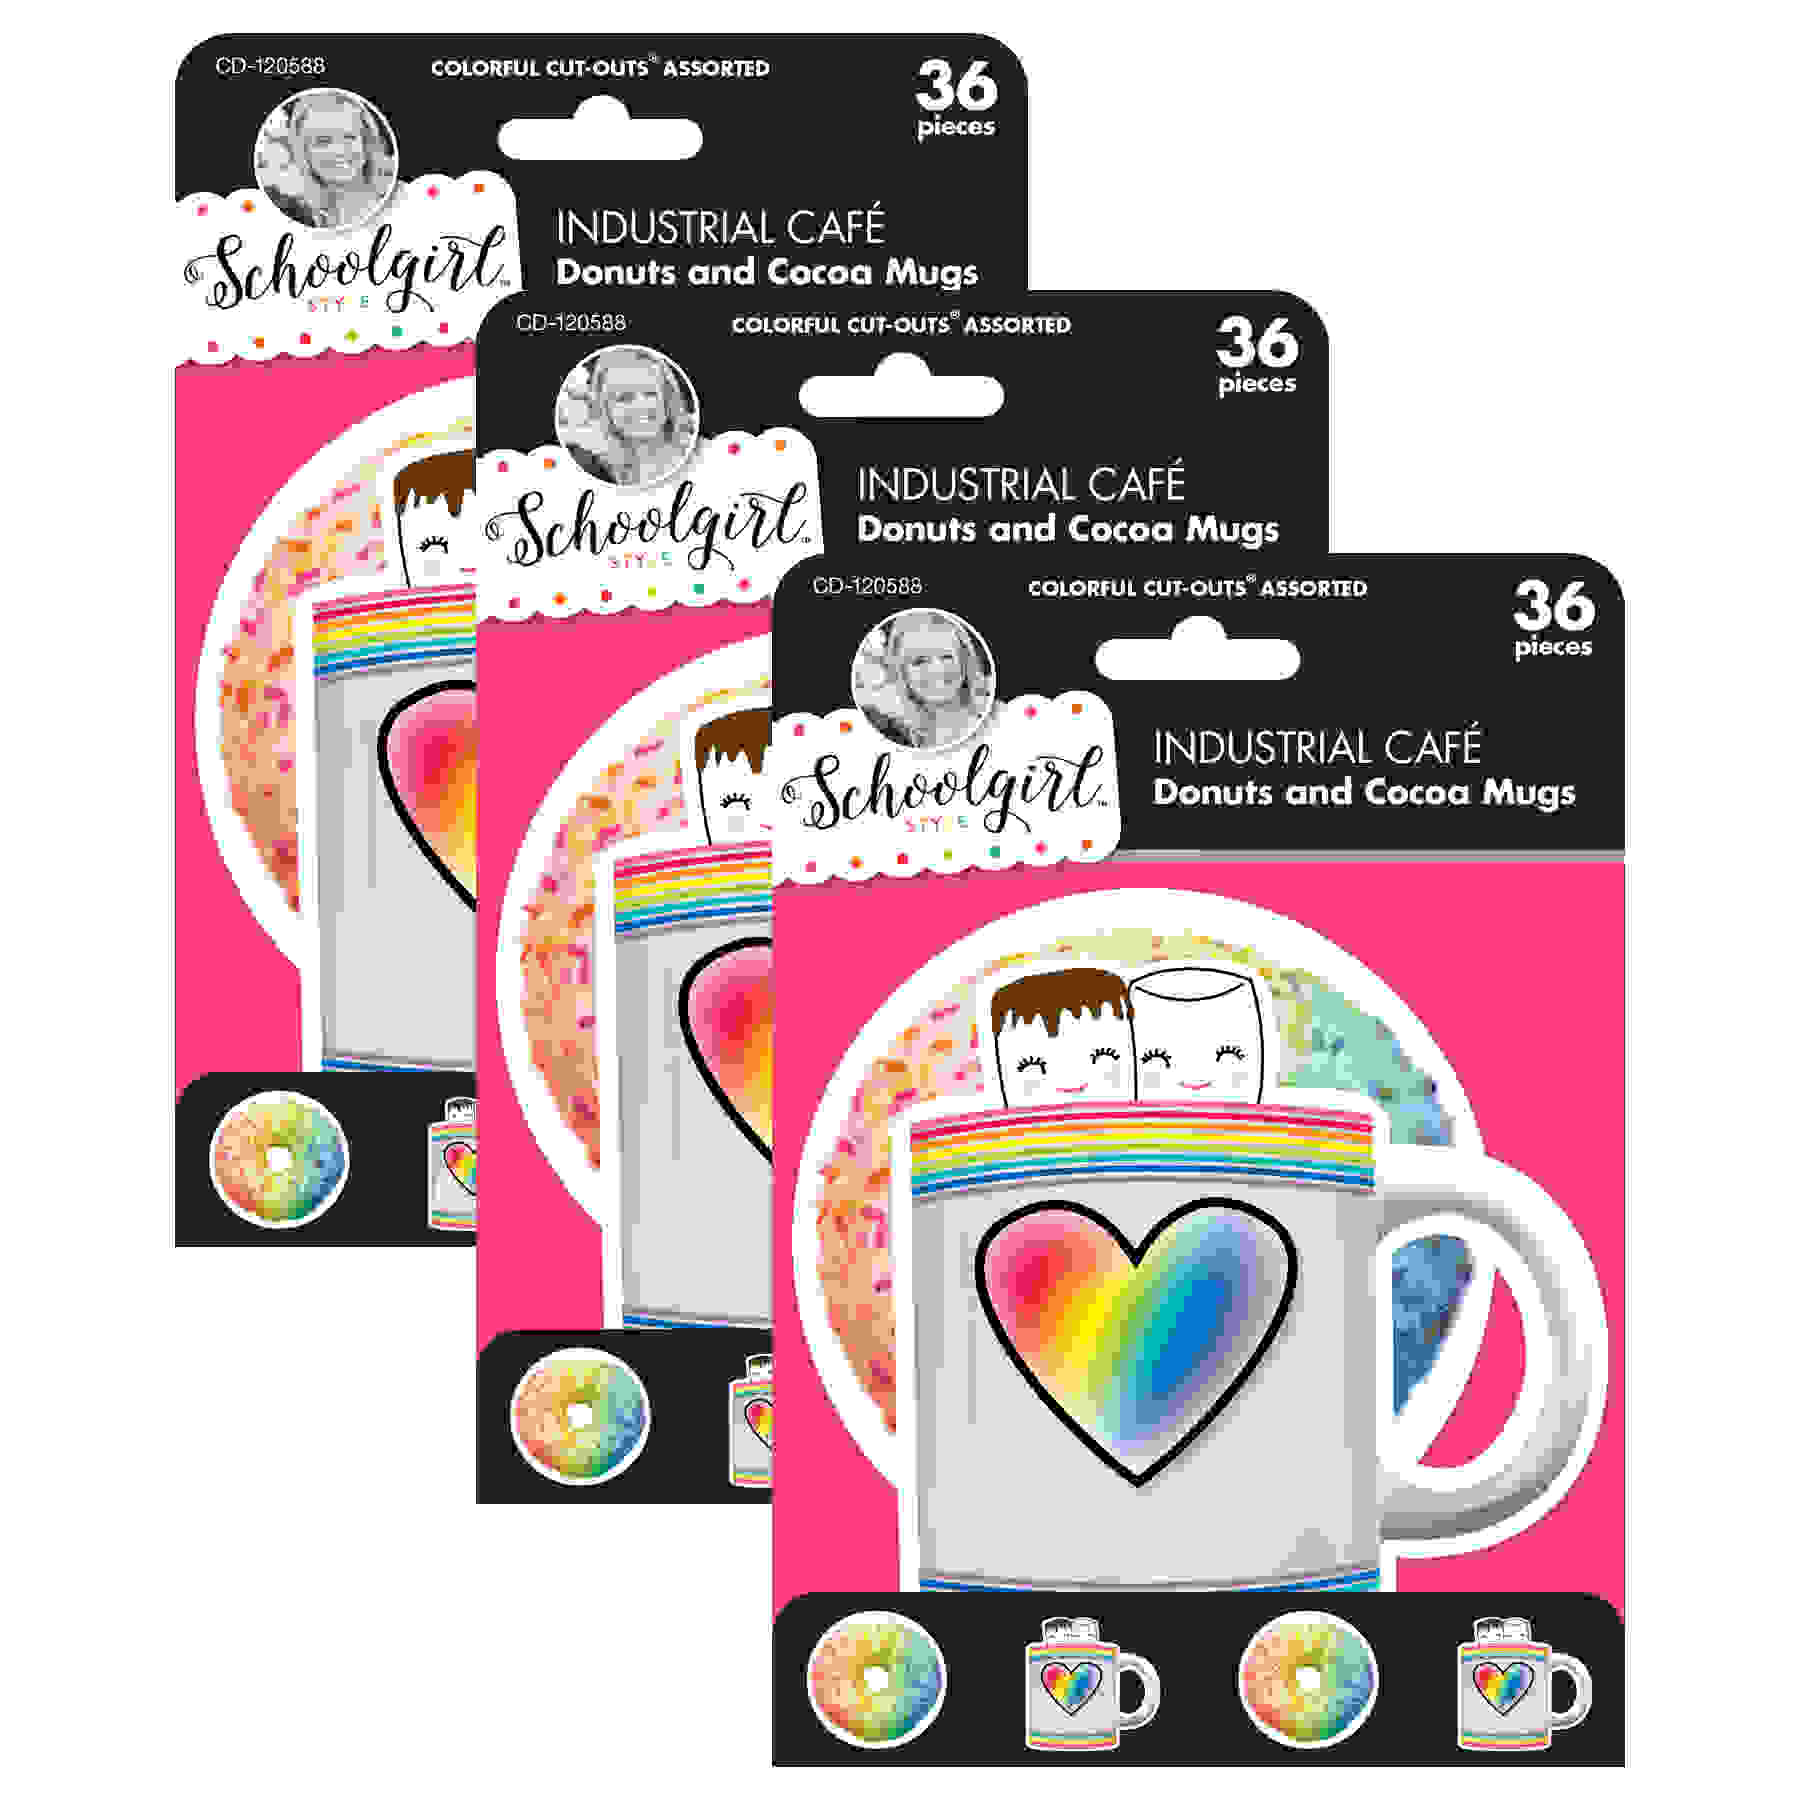 Industrial Cafe Donuts and Cocoa Mugs Cut-Outs, 36 Per Pack, 3 Packs